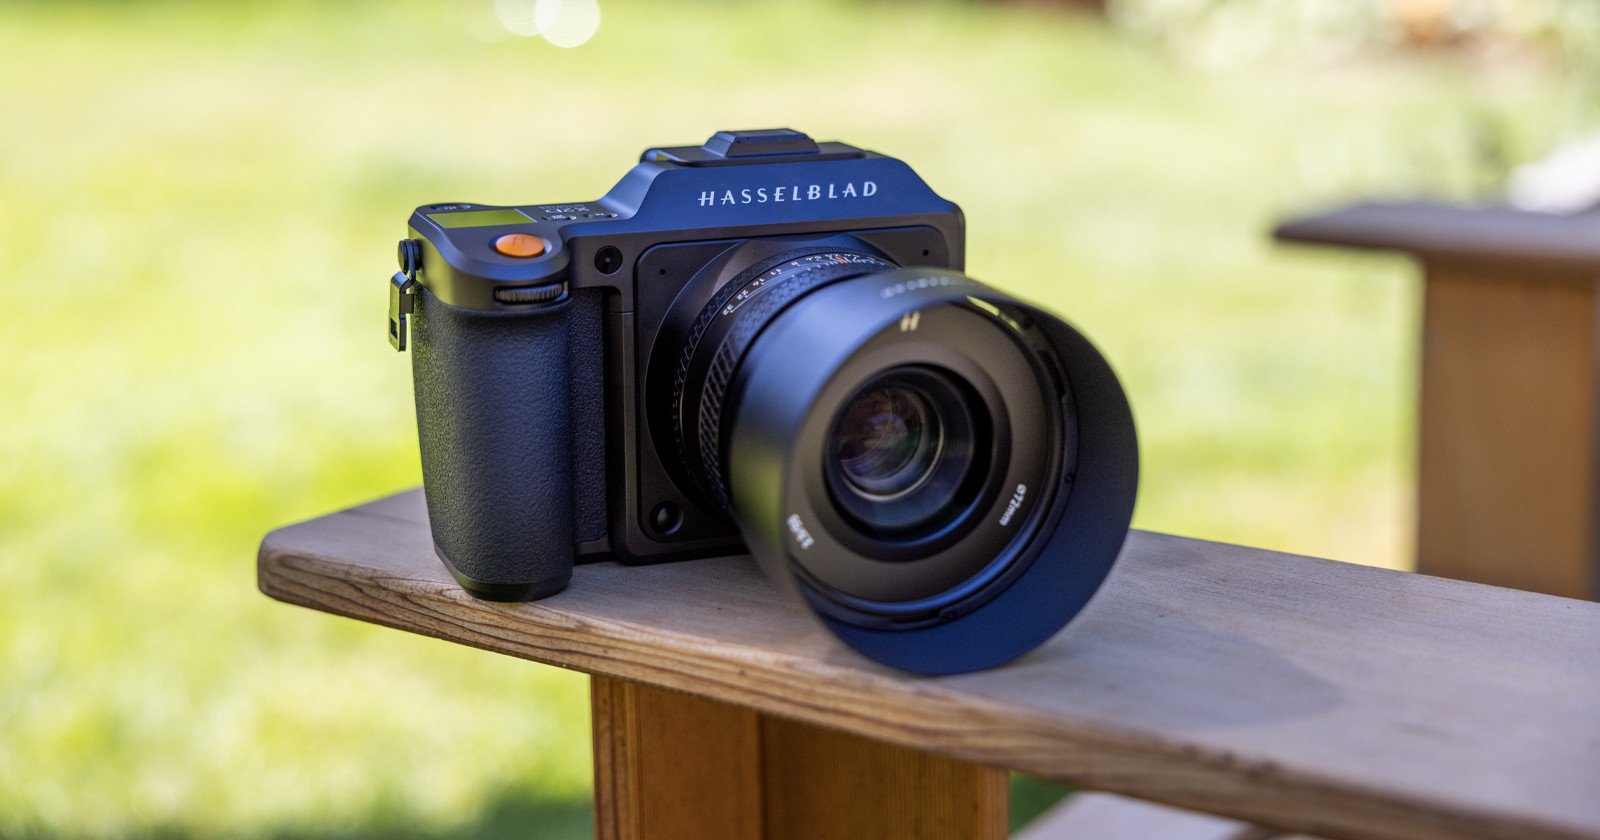  hasselblad x2d 100c first impressions enjoyable experience 